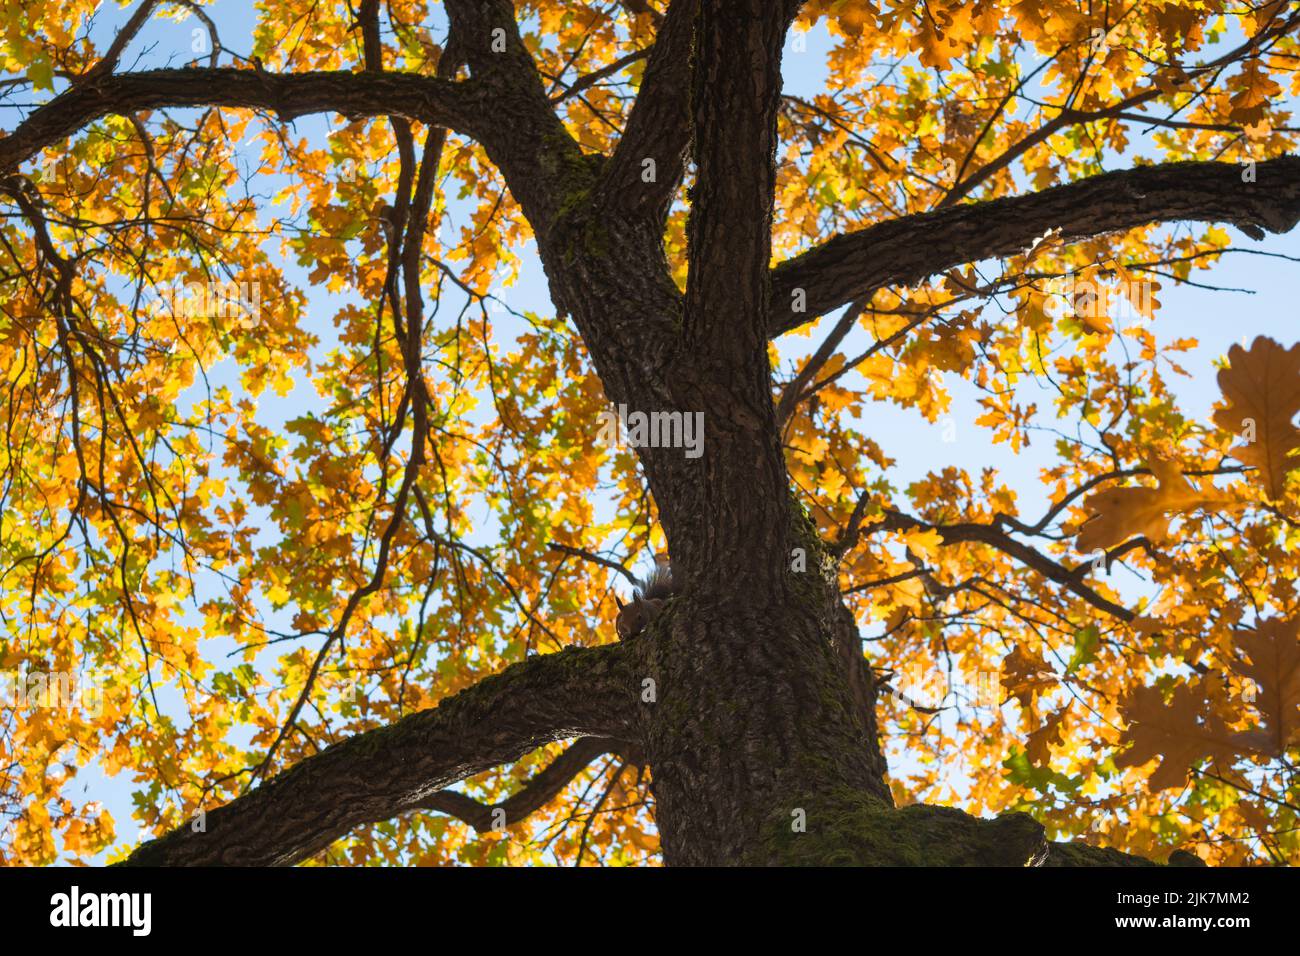 Autumn tree with yellow leaves. Fall background Stock Photo